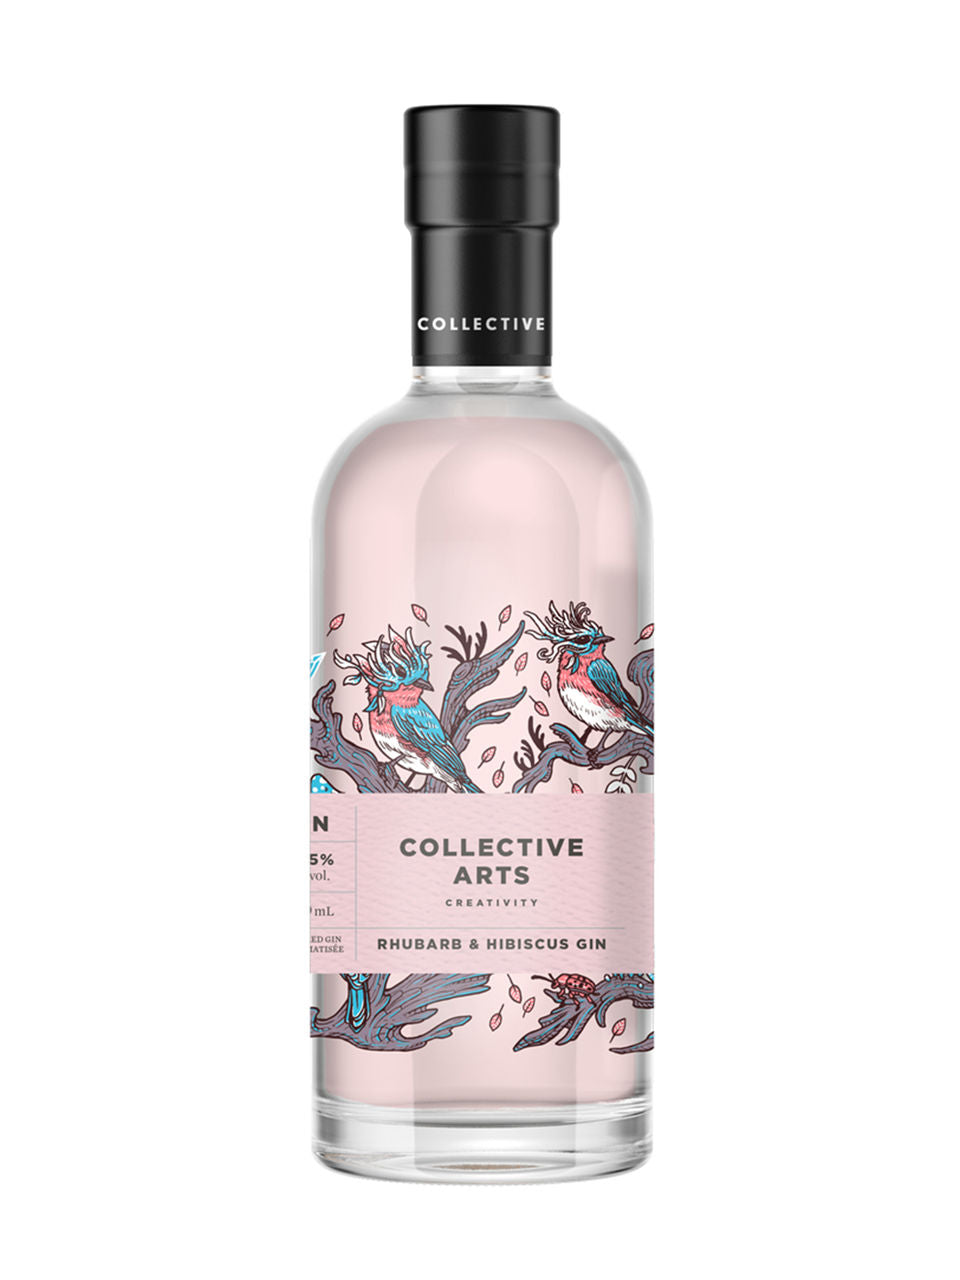 Collective Arts Rhubarb & Hibiscus Gin 750 mL bottle